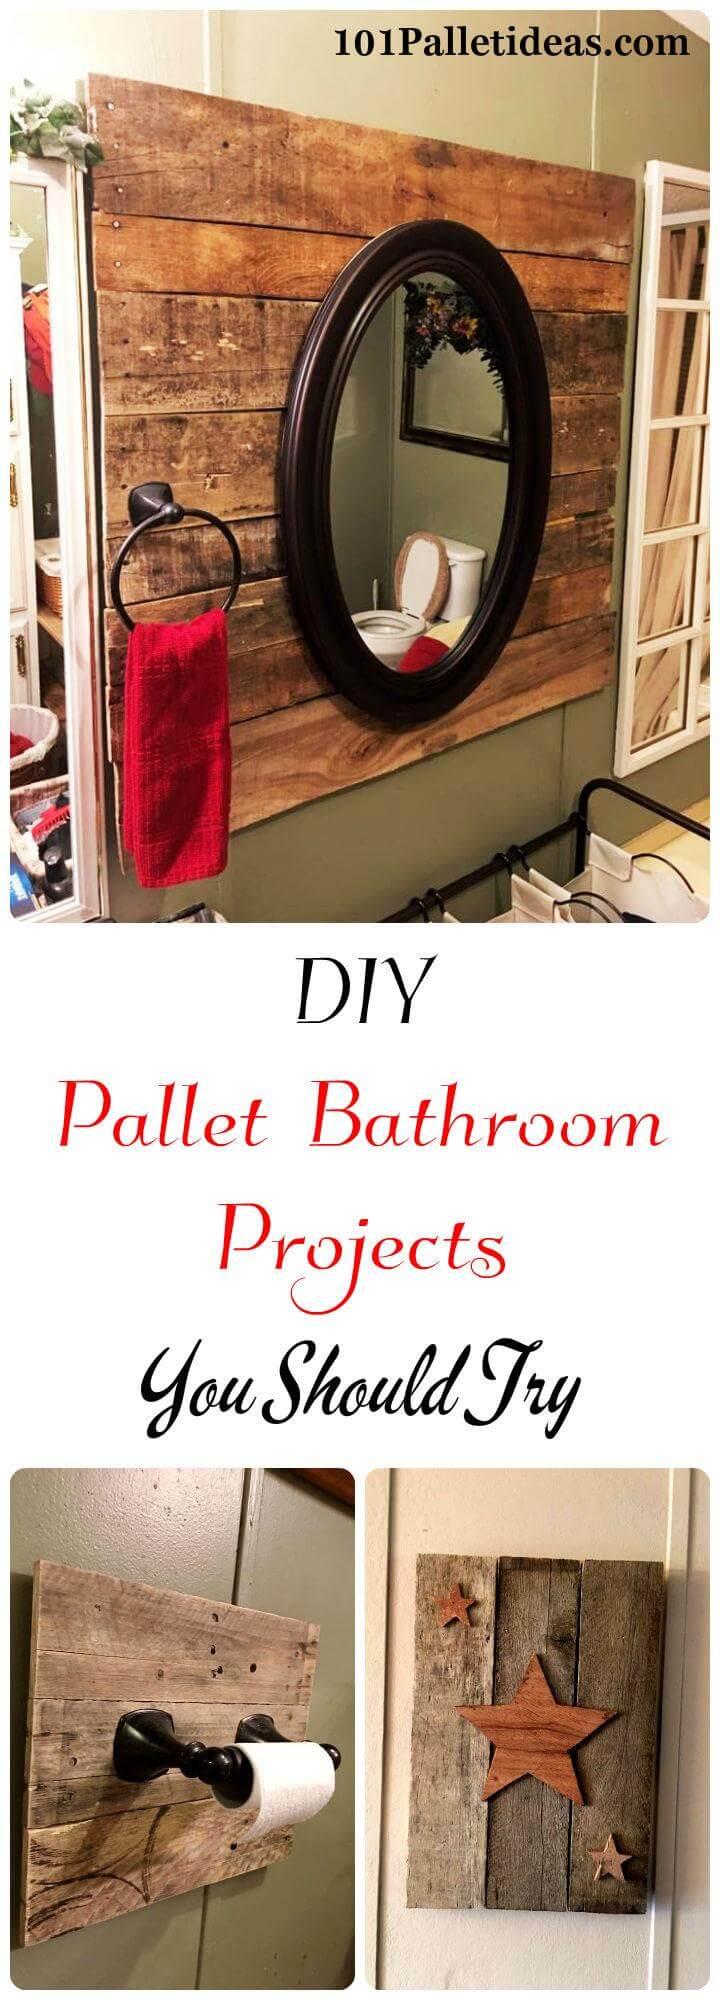 pallet bathroom projects